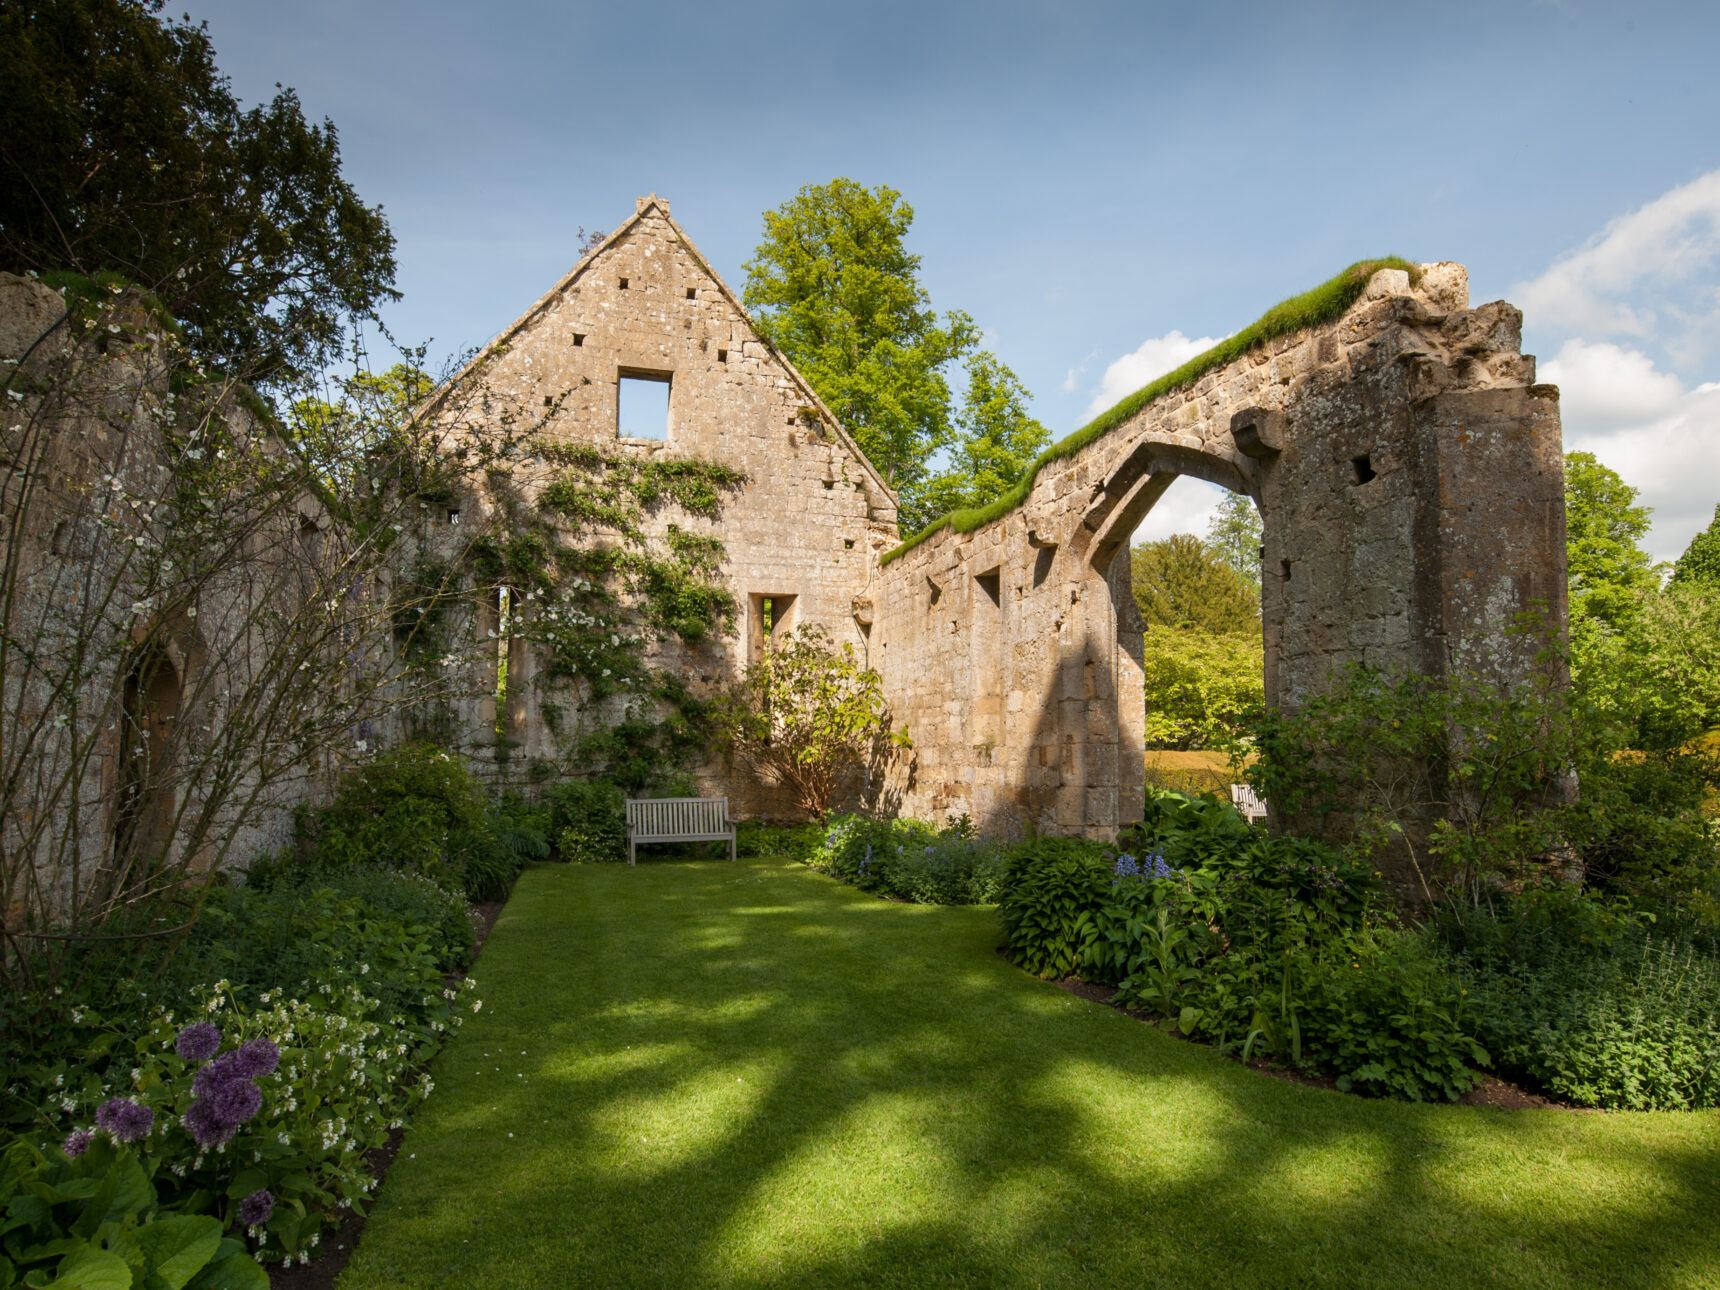 The romantic ruins of the ancient Tithe Barn bring real charm to your wedding ceremony